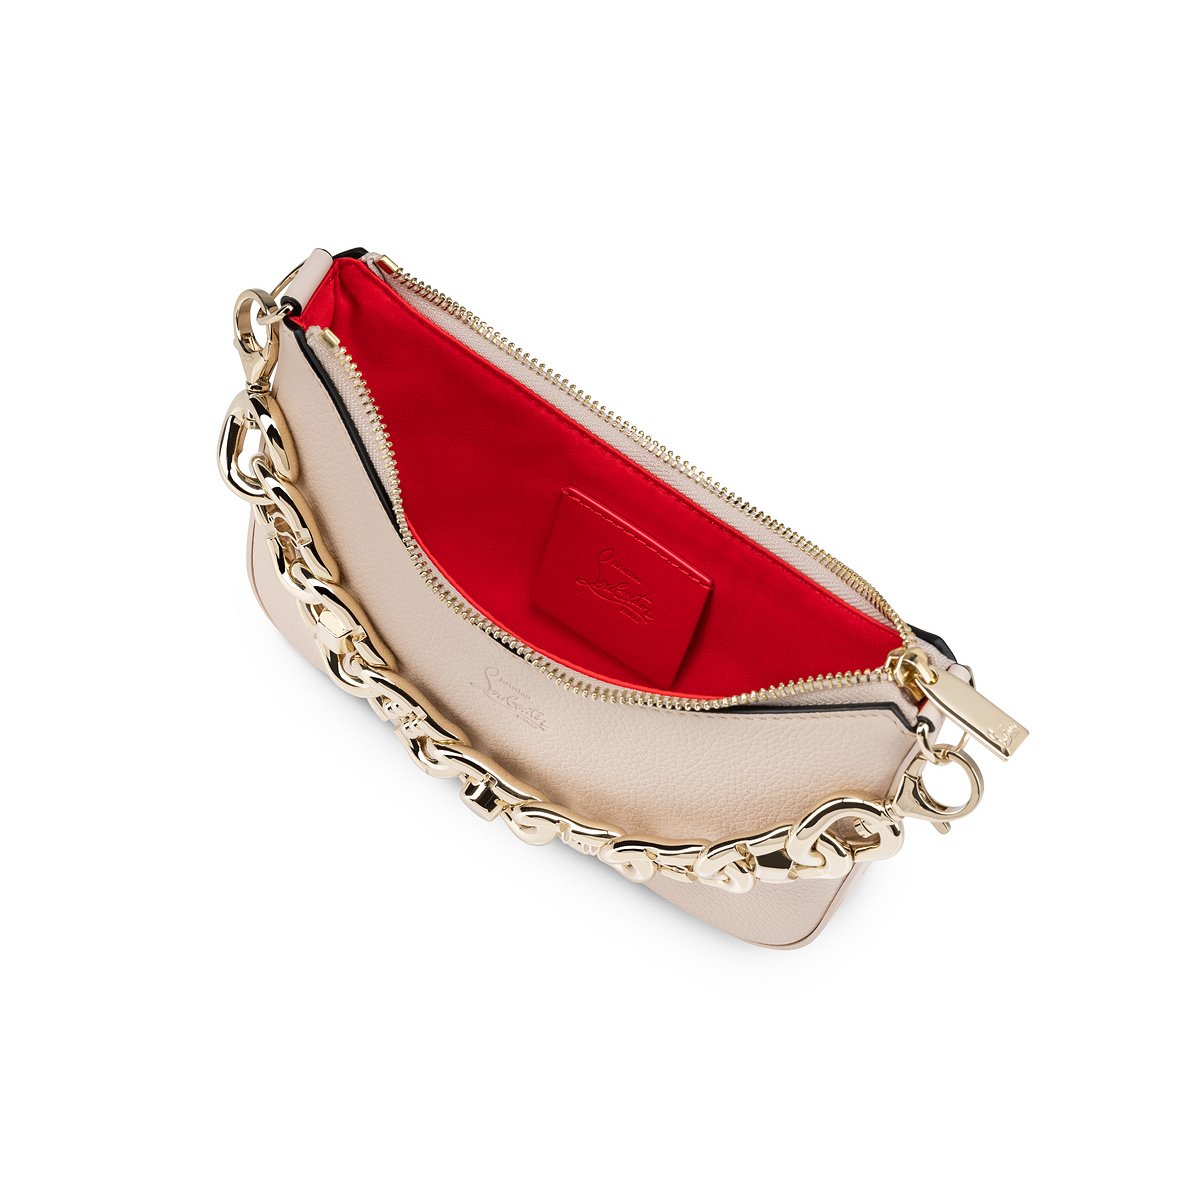 Christian Louboutin LOUBILA MINI available in both Leche and